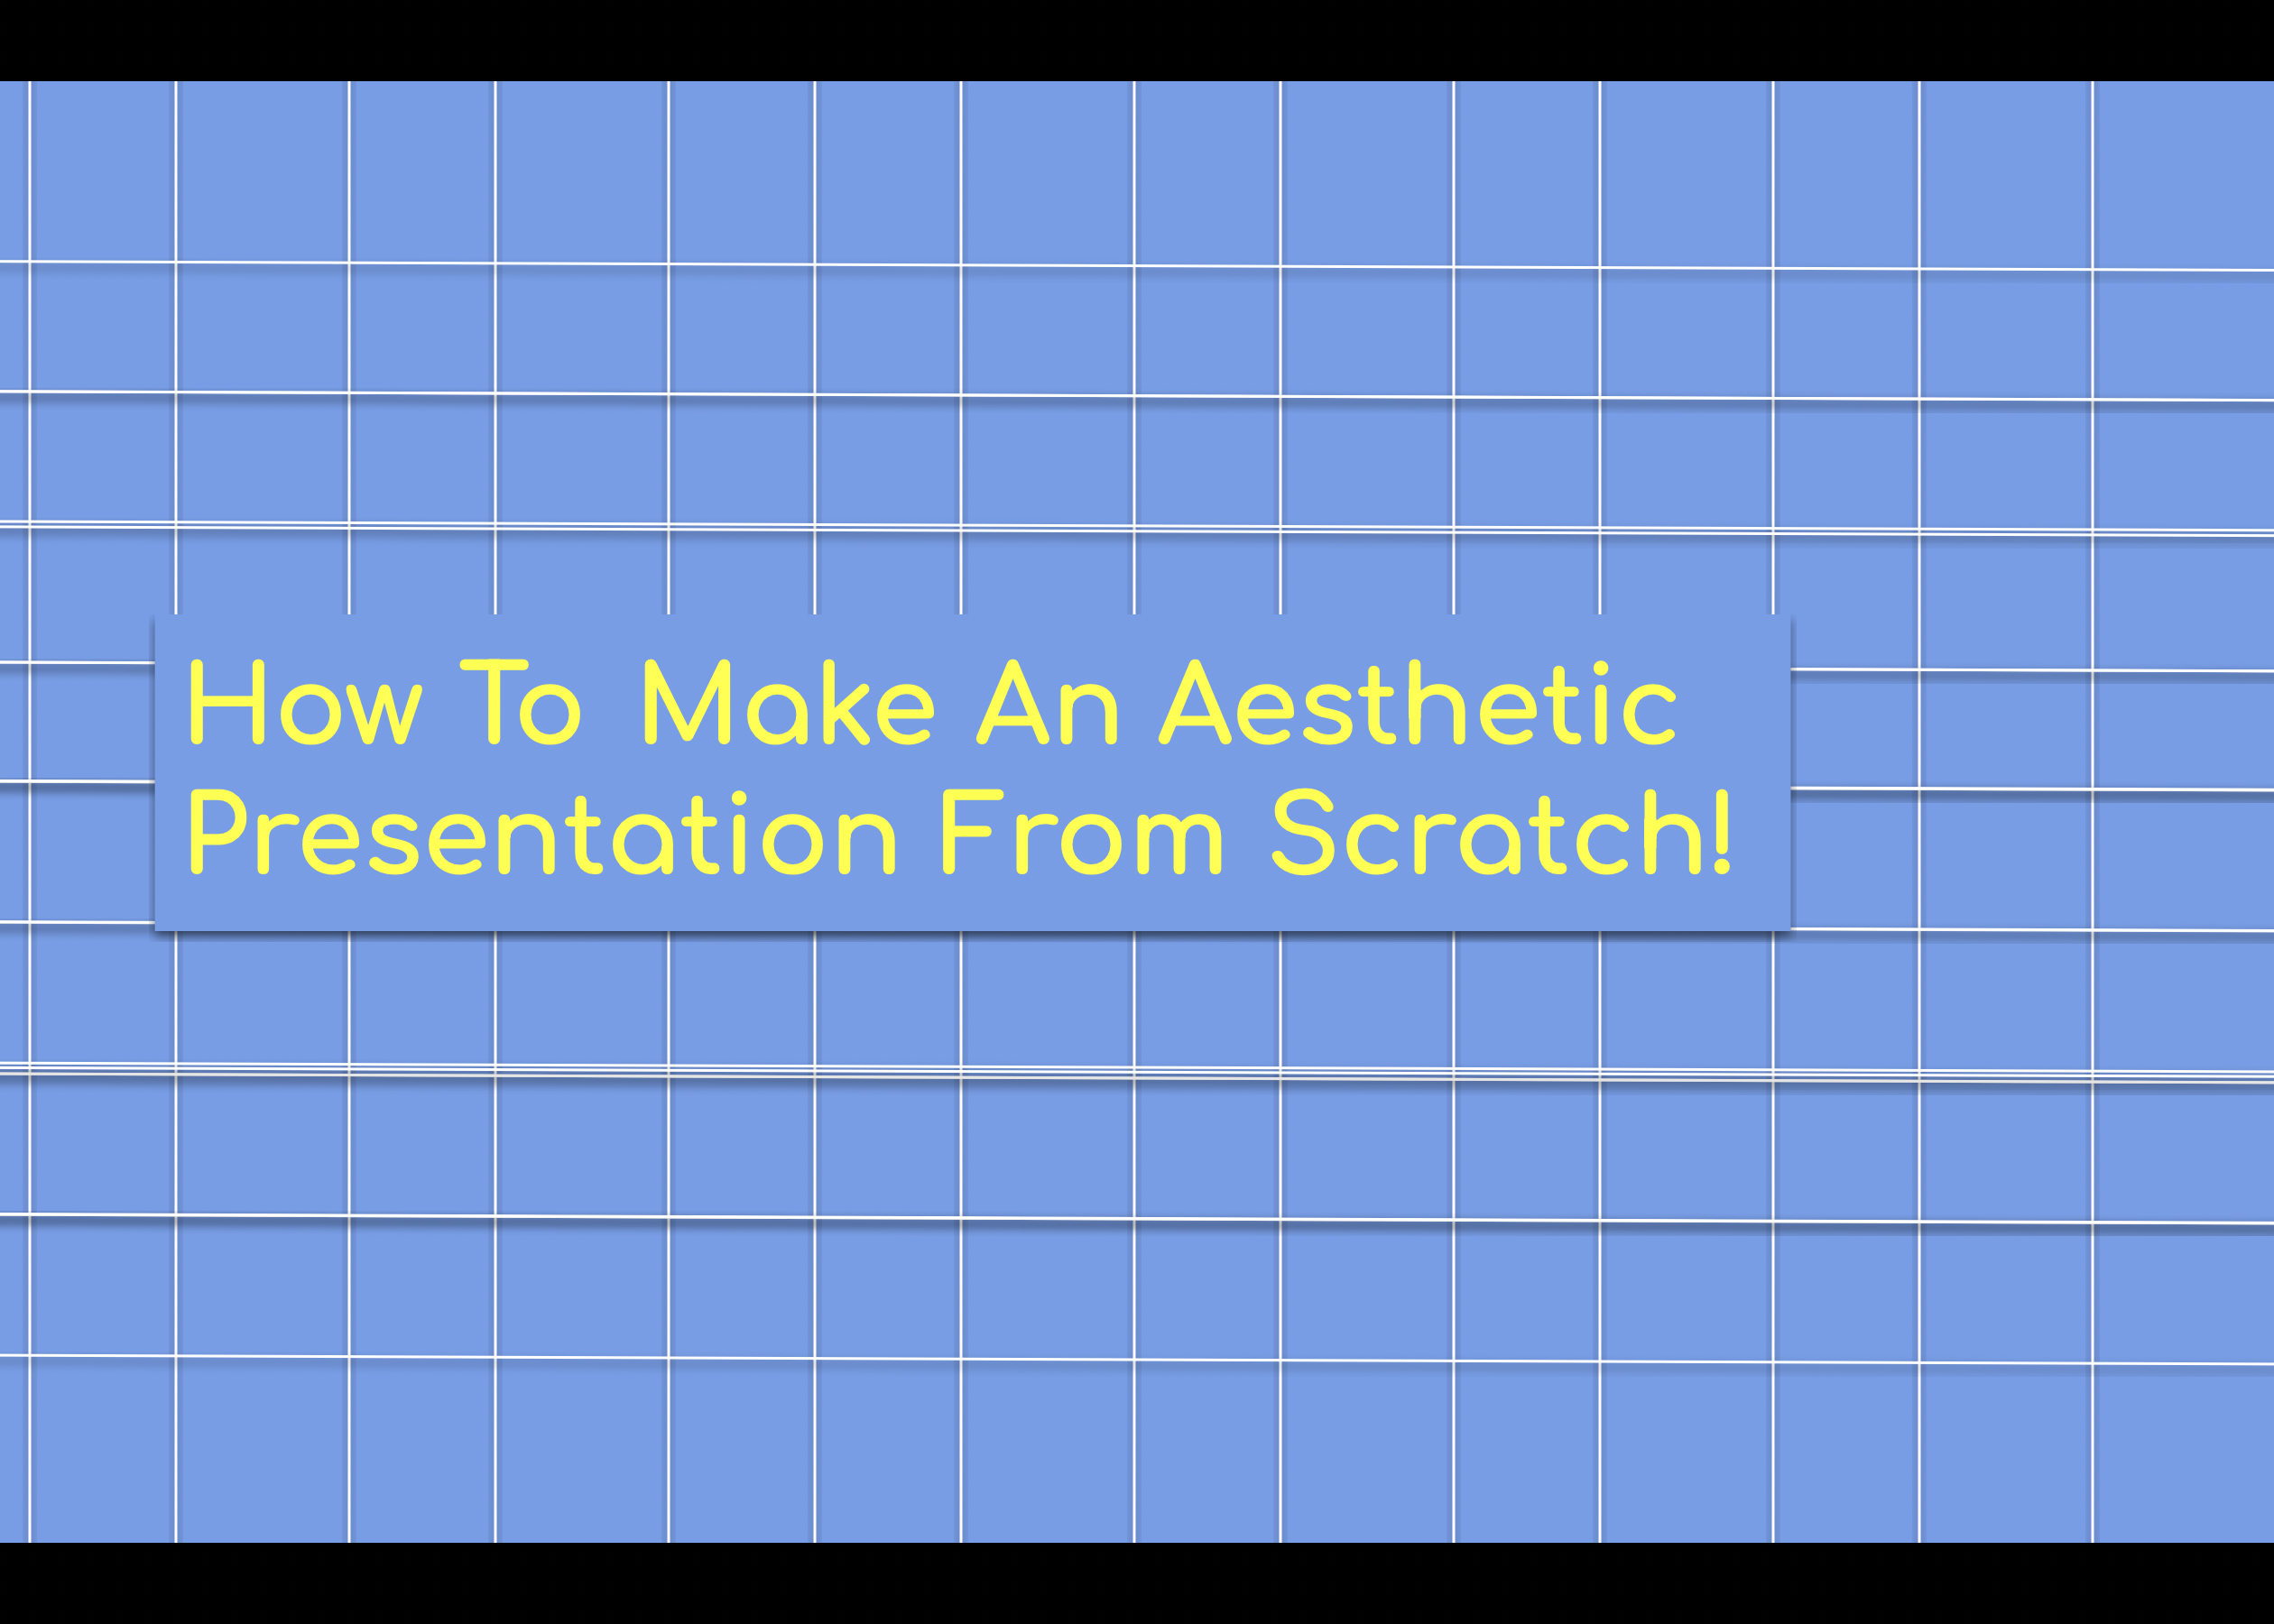 How to Make an Aesthetic Presentation From Scratch 2!